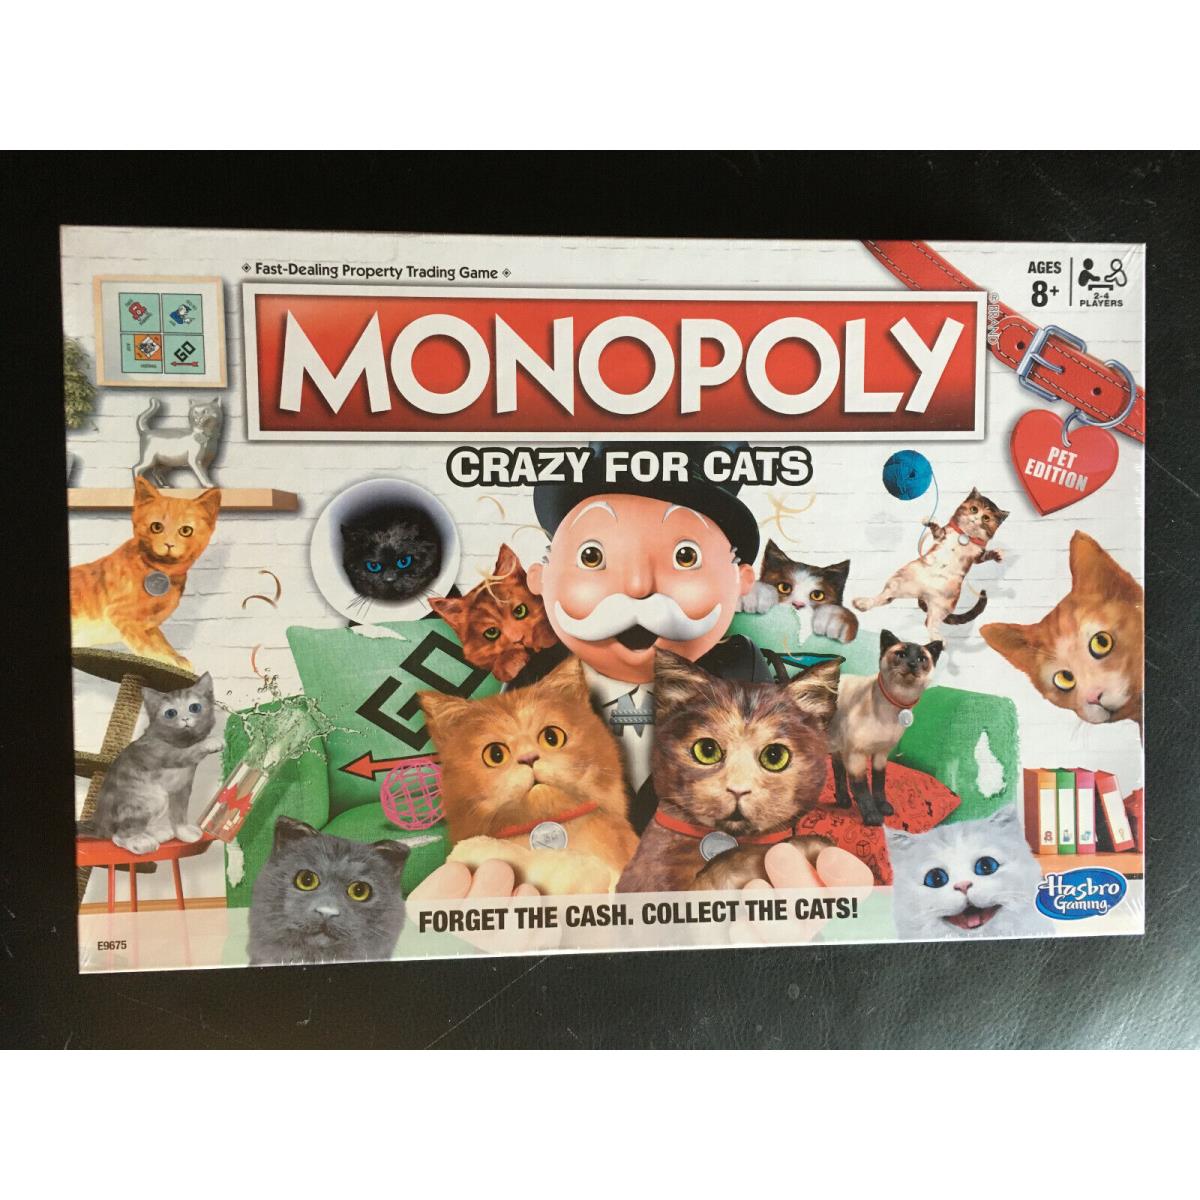 Monopoly - Crazy For Cats Edition Hasbro Board Game Ages 8+